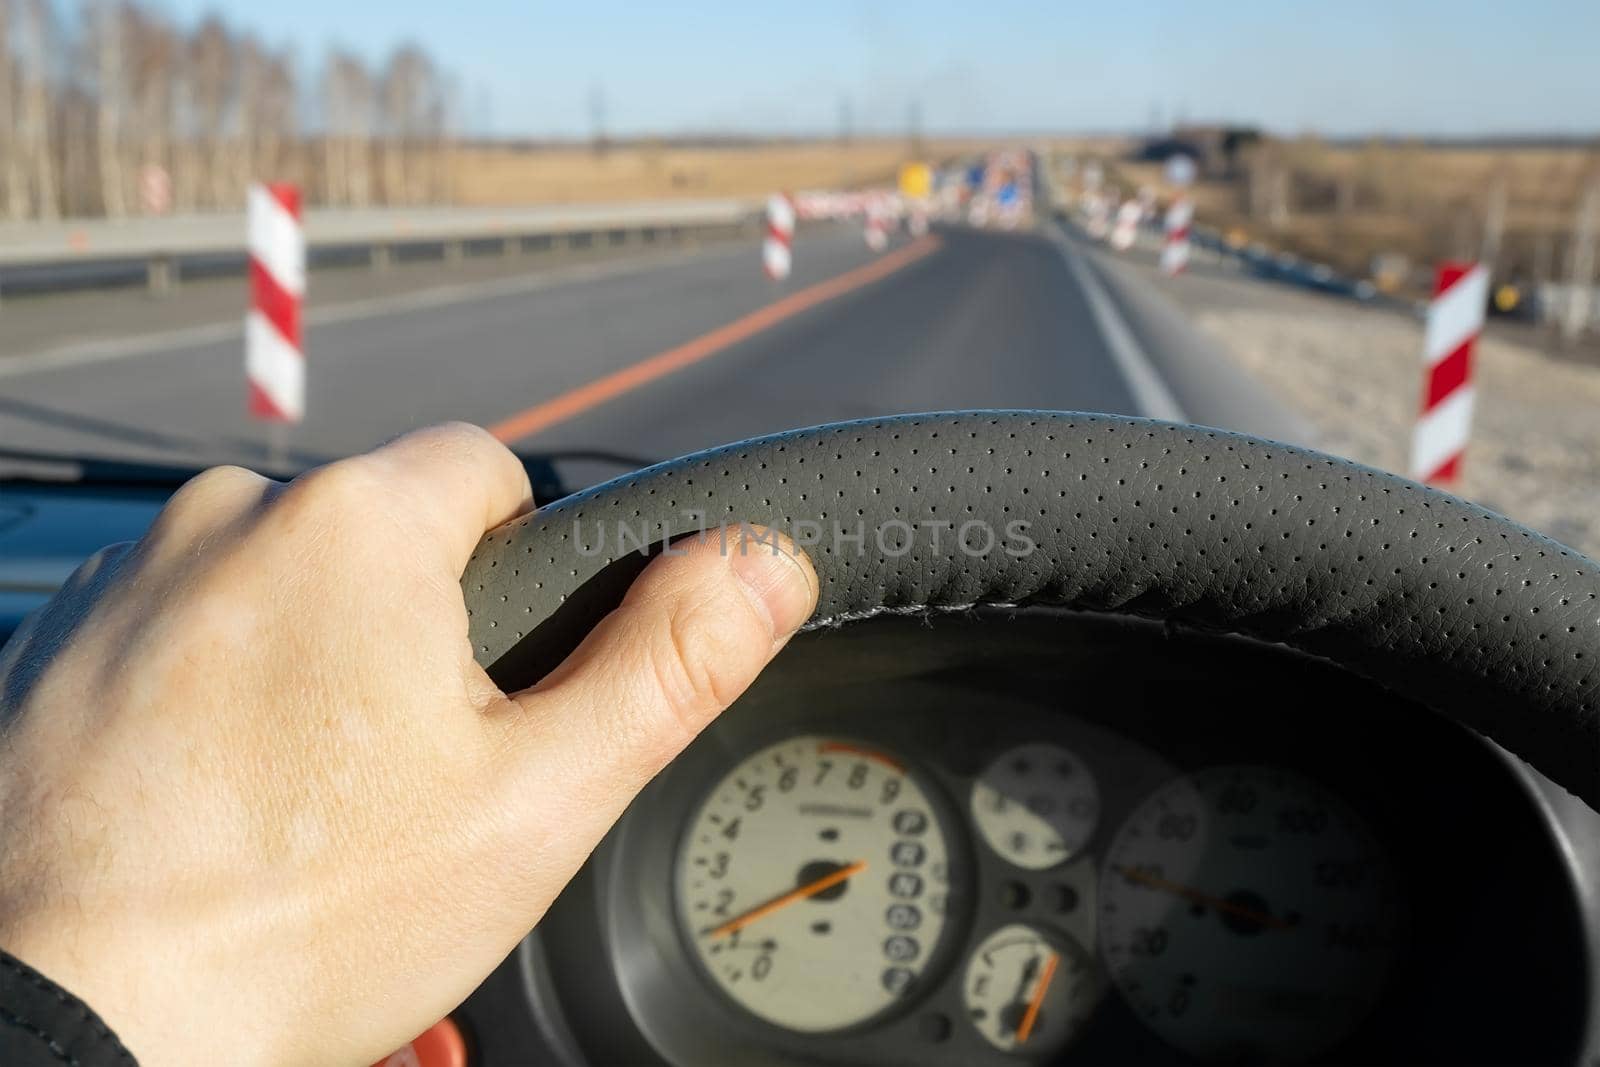 the driver hand on the steering wheel of the car and the dashboard on the background of the road being repaired with fences, columns indicating the path of the detour